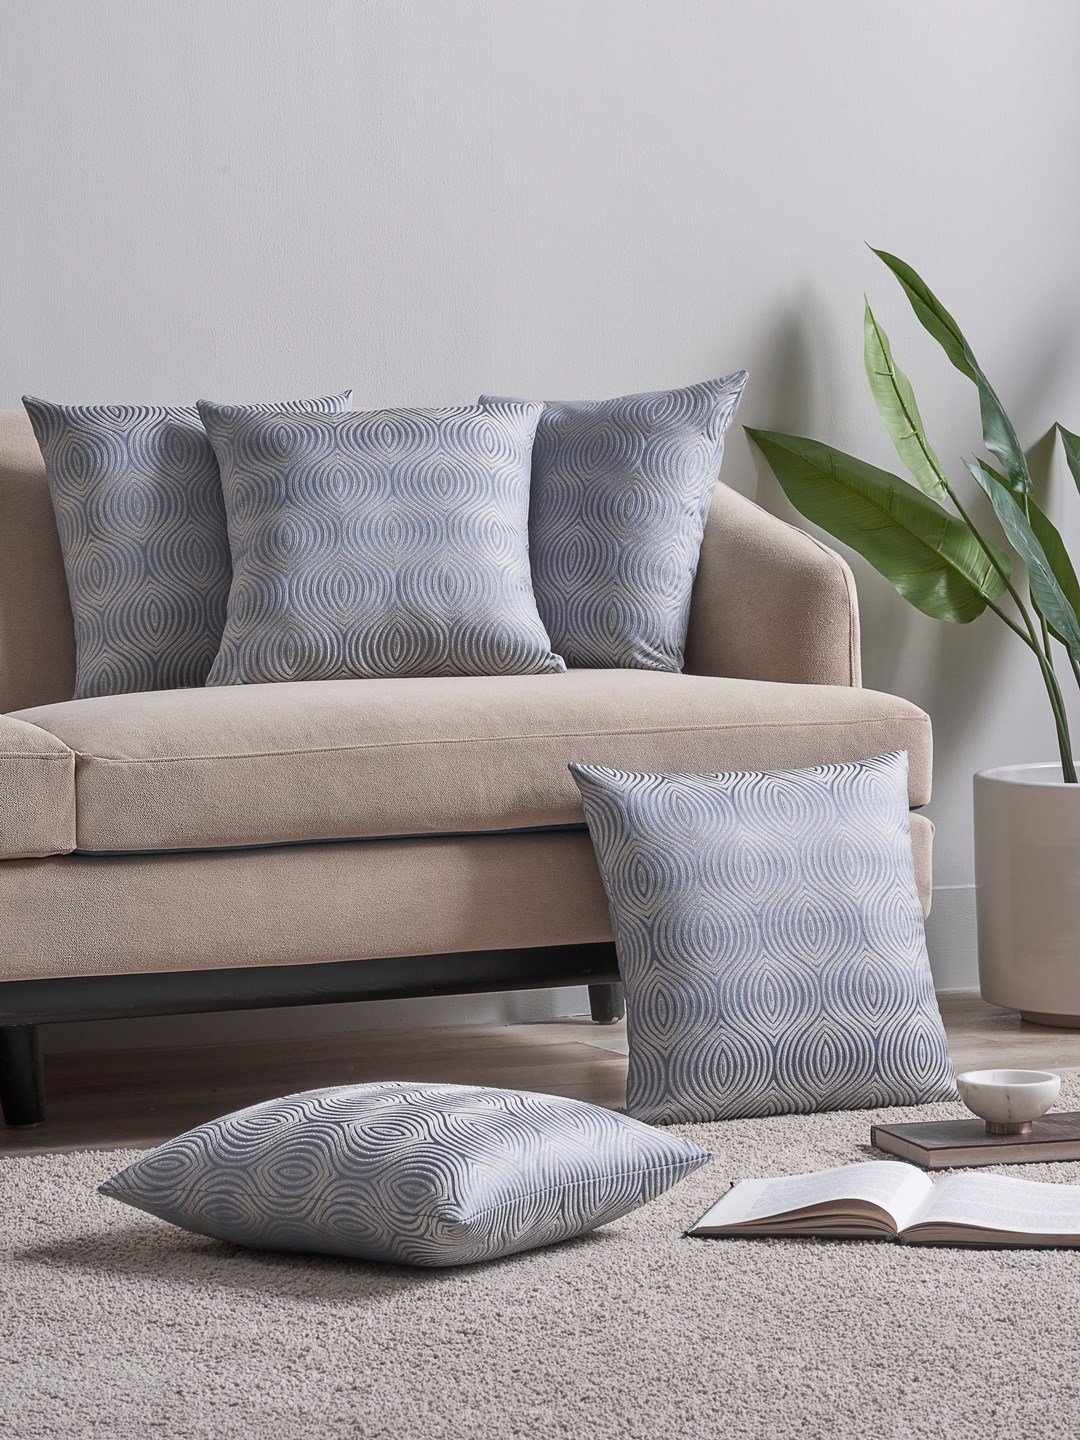 Expert Advice on Making Your Couch Comfortable - FoamOnline